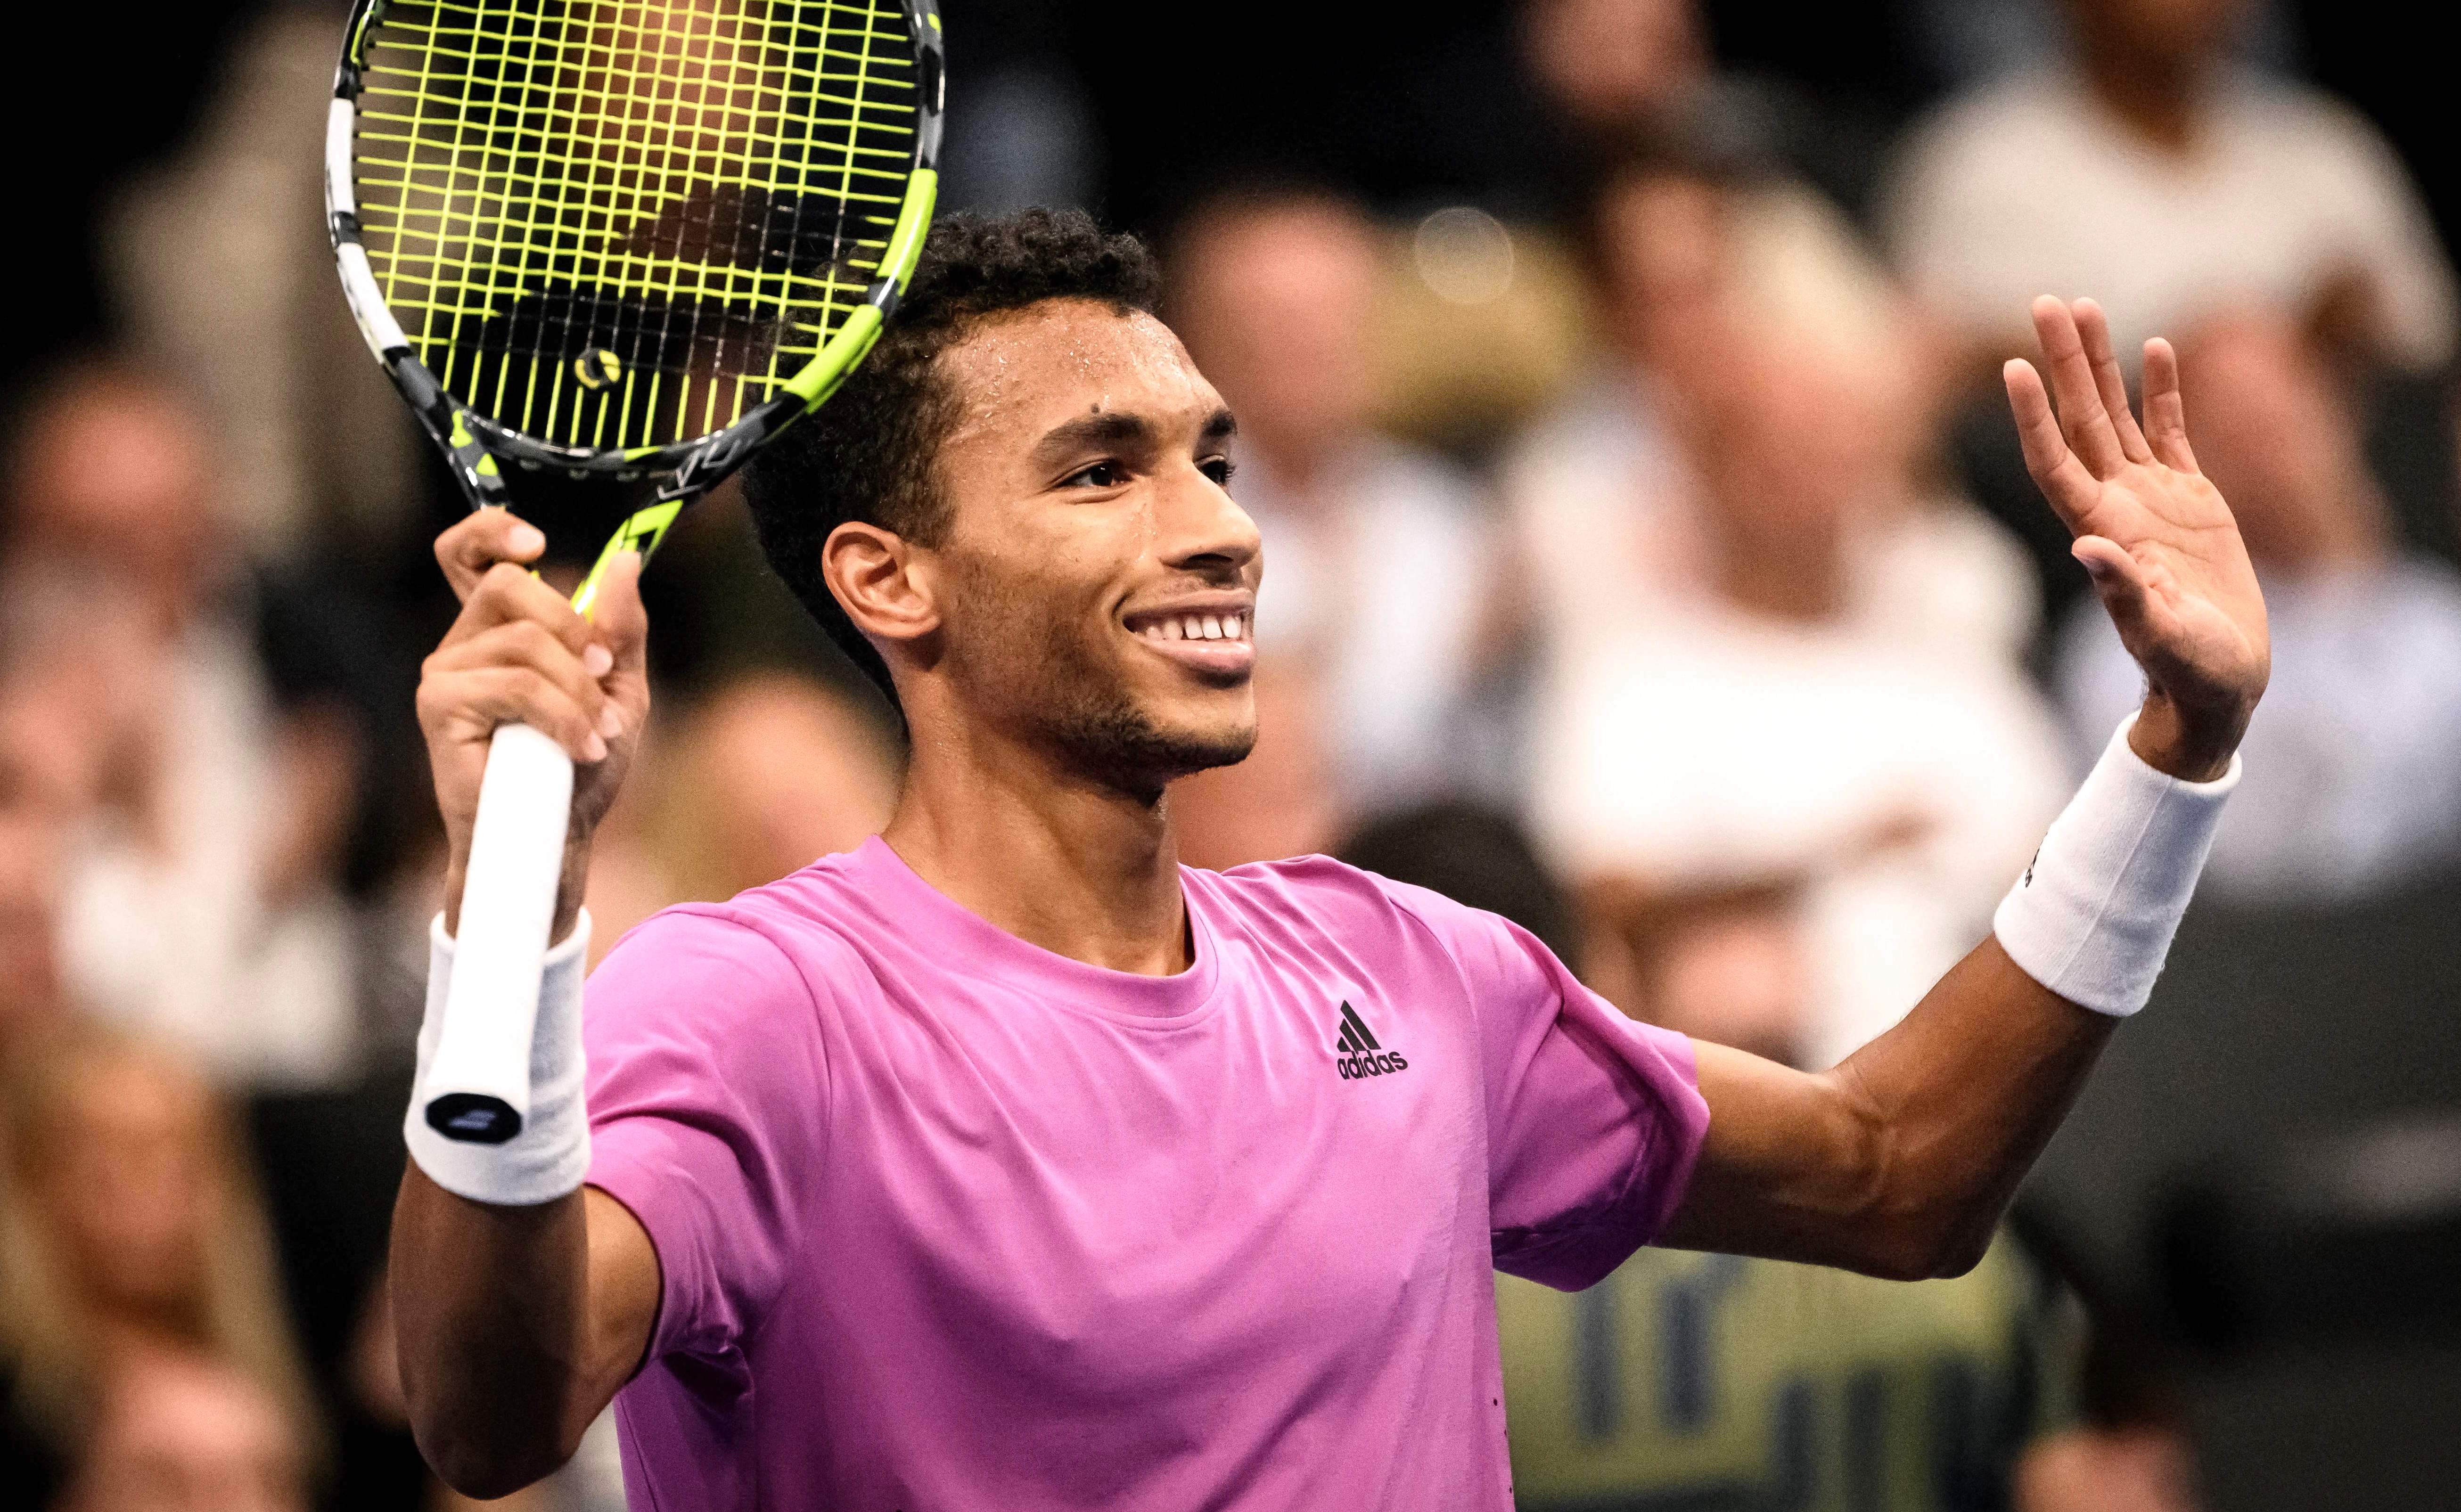 Stat of the Day Felix Auger-Aliassime has now held his last 75 service games in a row